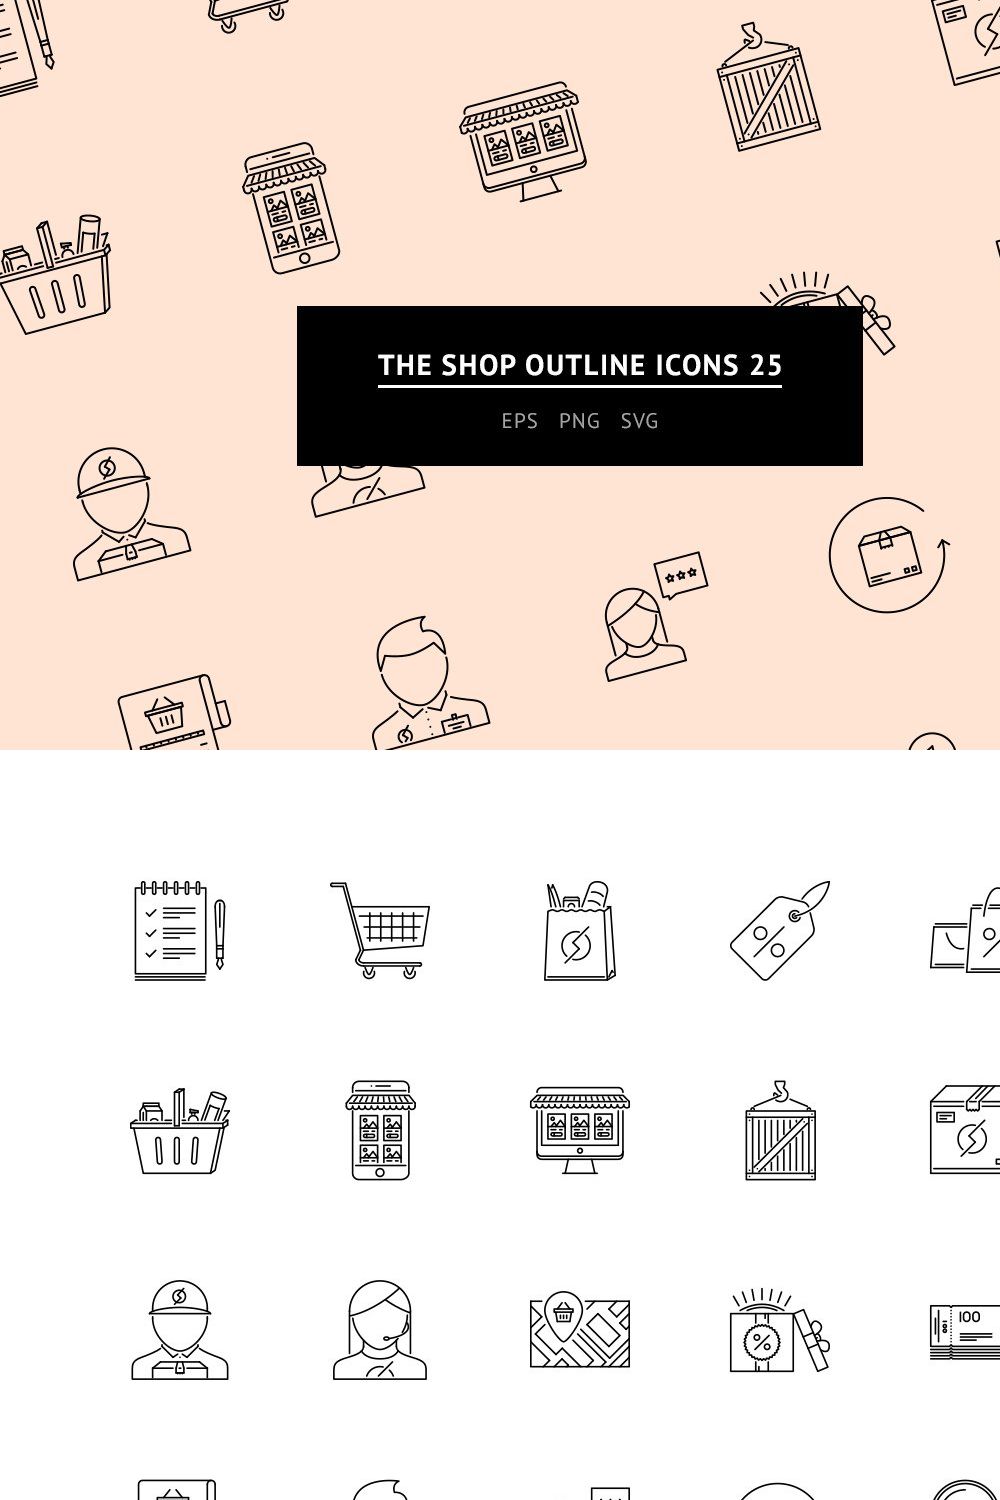 The Shop Outline Icons 25 pinterest preview image.